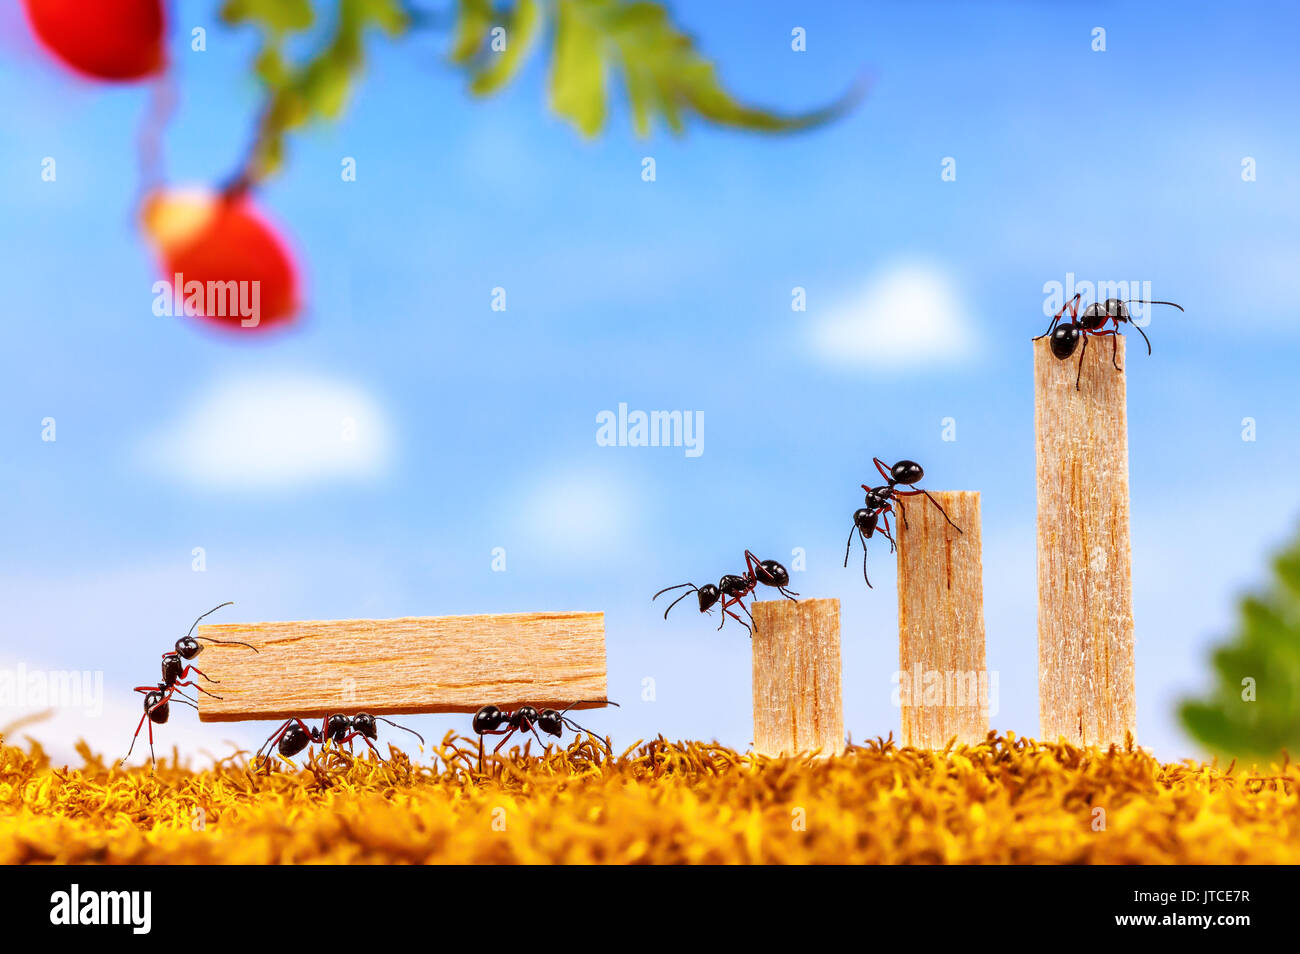 Ants carrying wood for business graph, teamwork concept Stock Photo